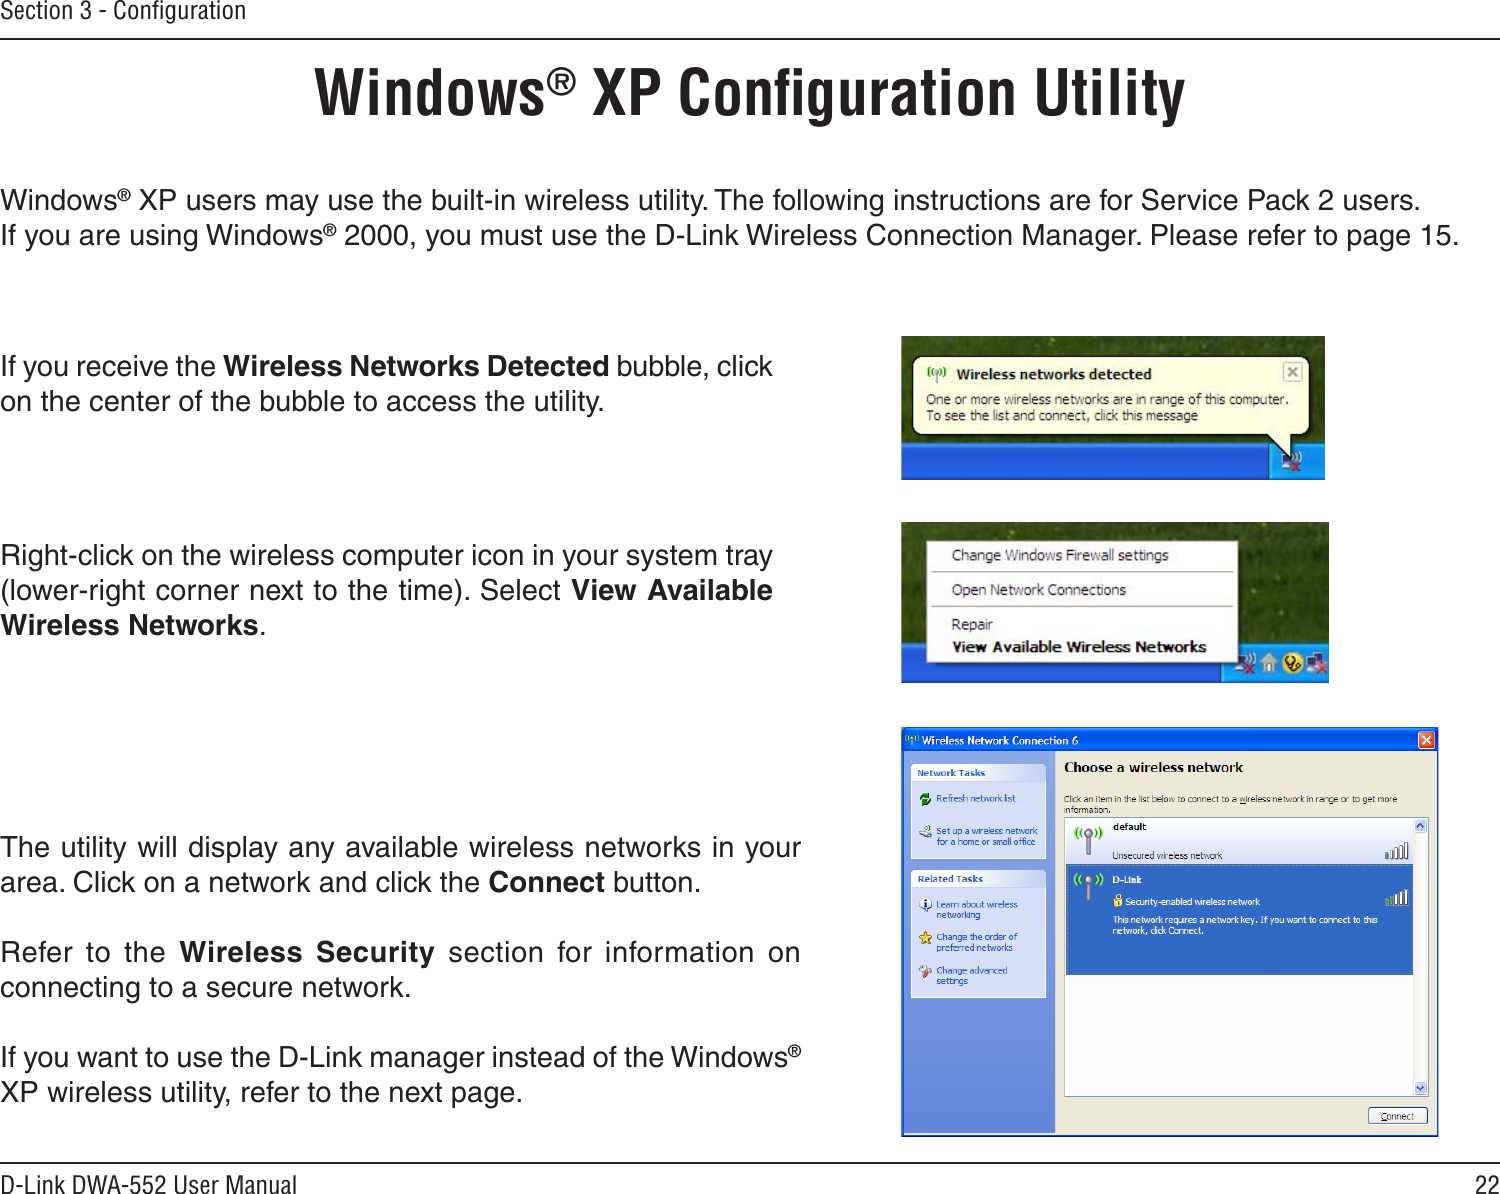 22D-Link DWA-552 User ManualSection 3 - ConﬁgurationWindows® XP Conﬁguration UtilityWindows® XP users may use the built-in wireless utility. The following instructions are for Service Pack 2 users. If you are using Windows® 2000, you must use the D-Link Wireless Connection Manager. Please refer to page 15.Right-click on the wireless computer icon in your system tray (lower-right corner next to the time). Select View Available Wireless Networks.If you receive the Wireless Networks Detected bubble, click on the center of the bubble to access the utility.The utility will display any available wireless networks in your area. Click on a network and click the Connect button.Refer  to  the  Wireless  Security  section  for  information  on connecting to a secure network.If you want to use the D-Link manager instead of the Windows® XP wireless utility, refer to the next page.